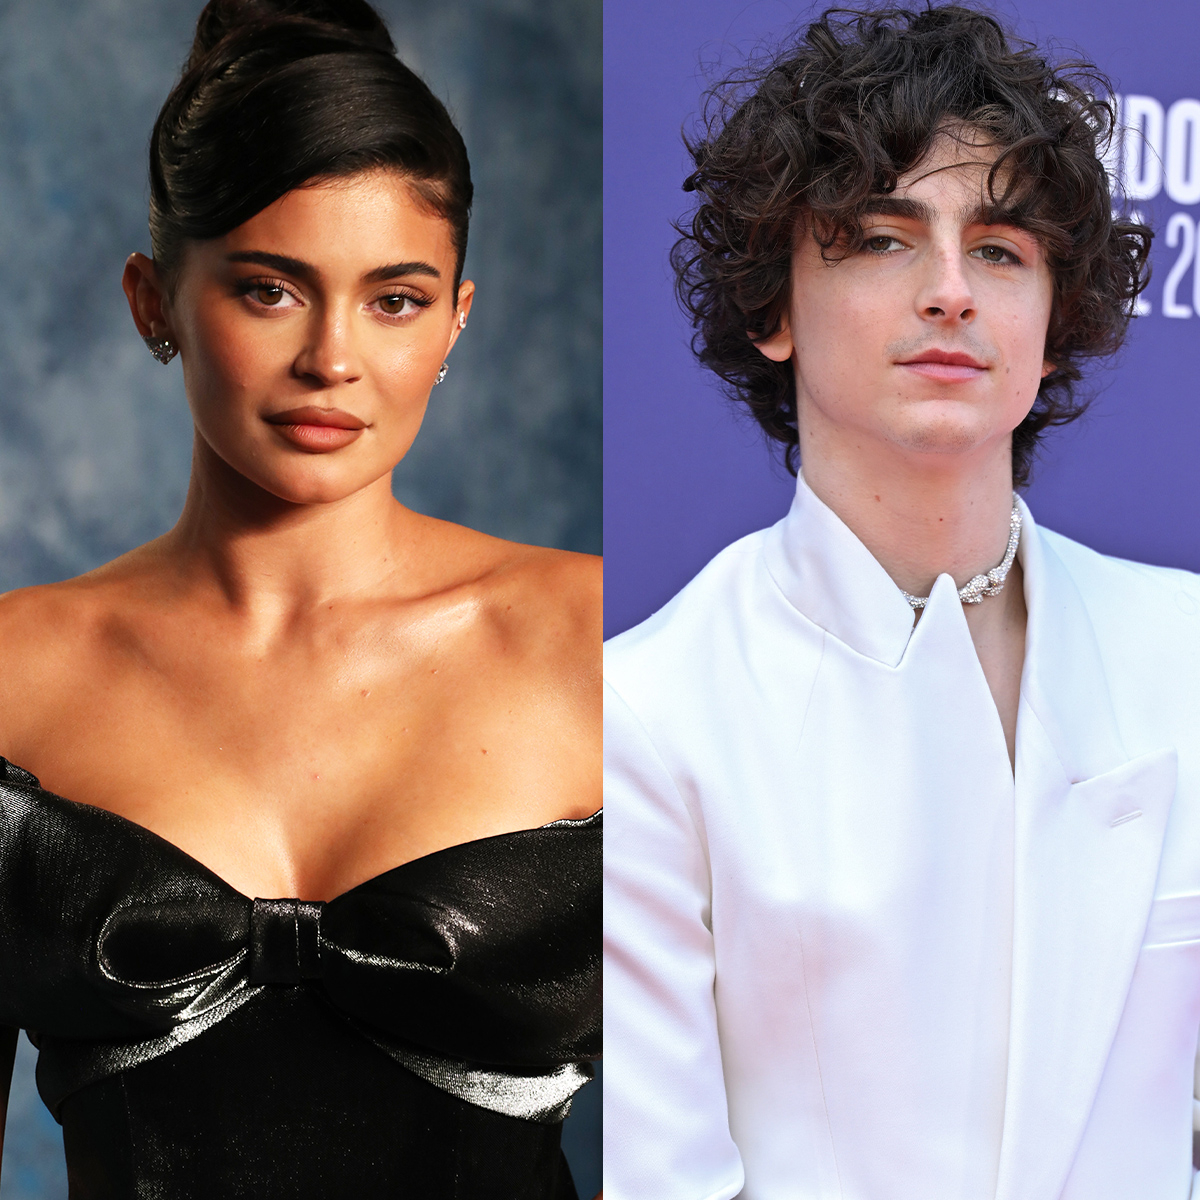 Kylie Jenner Makes Cheeky Reference to Timothée Chalamet Amid Romance